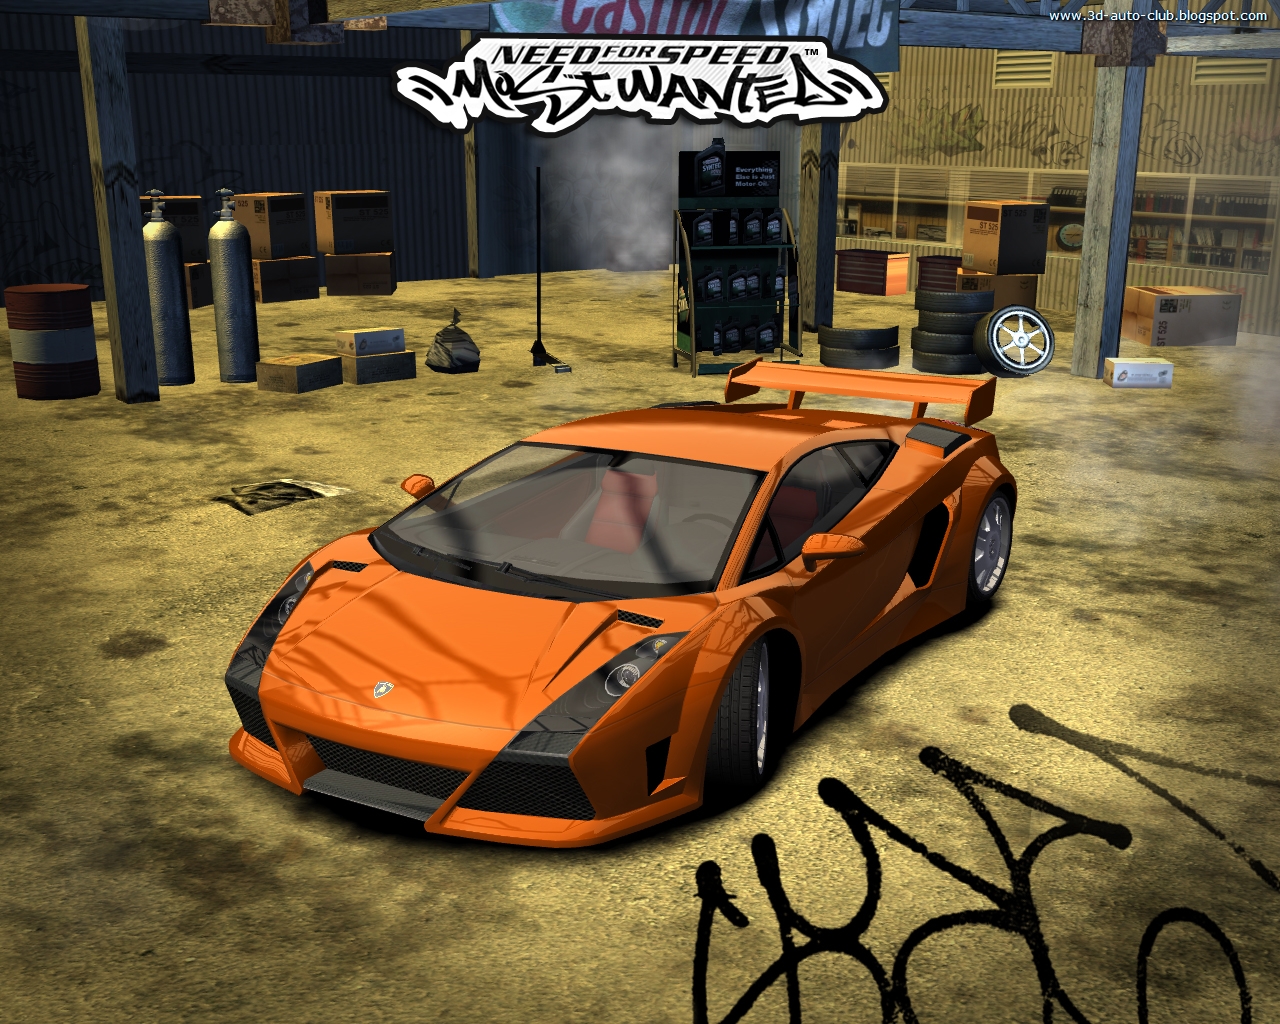 3d Auto Club: Wallpapers - Need for Speed Most Wanted (by 3D Auto Club ...